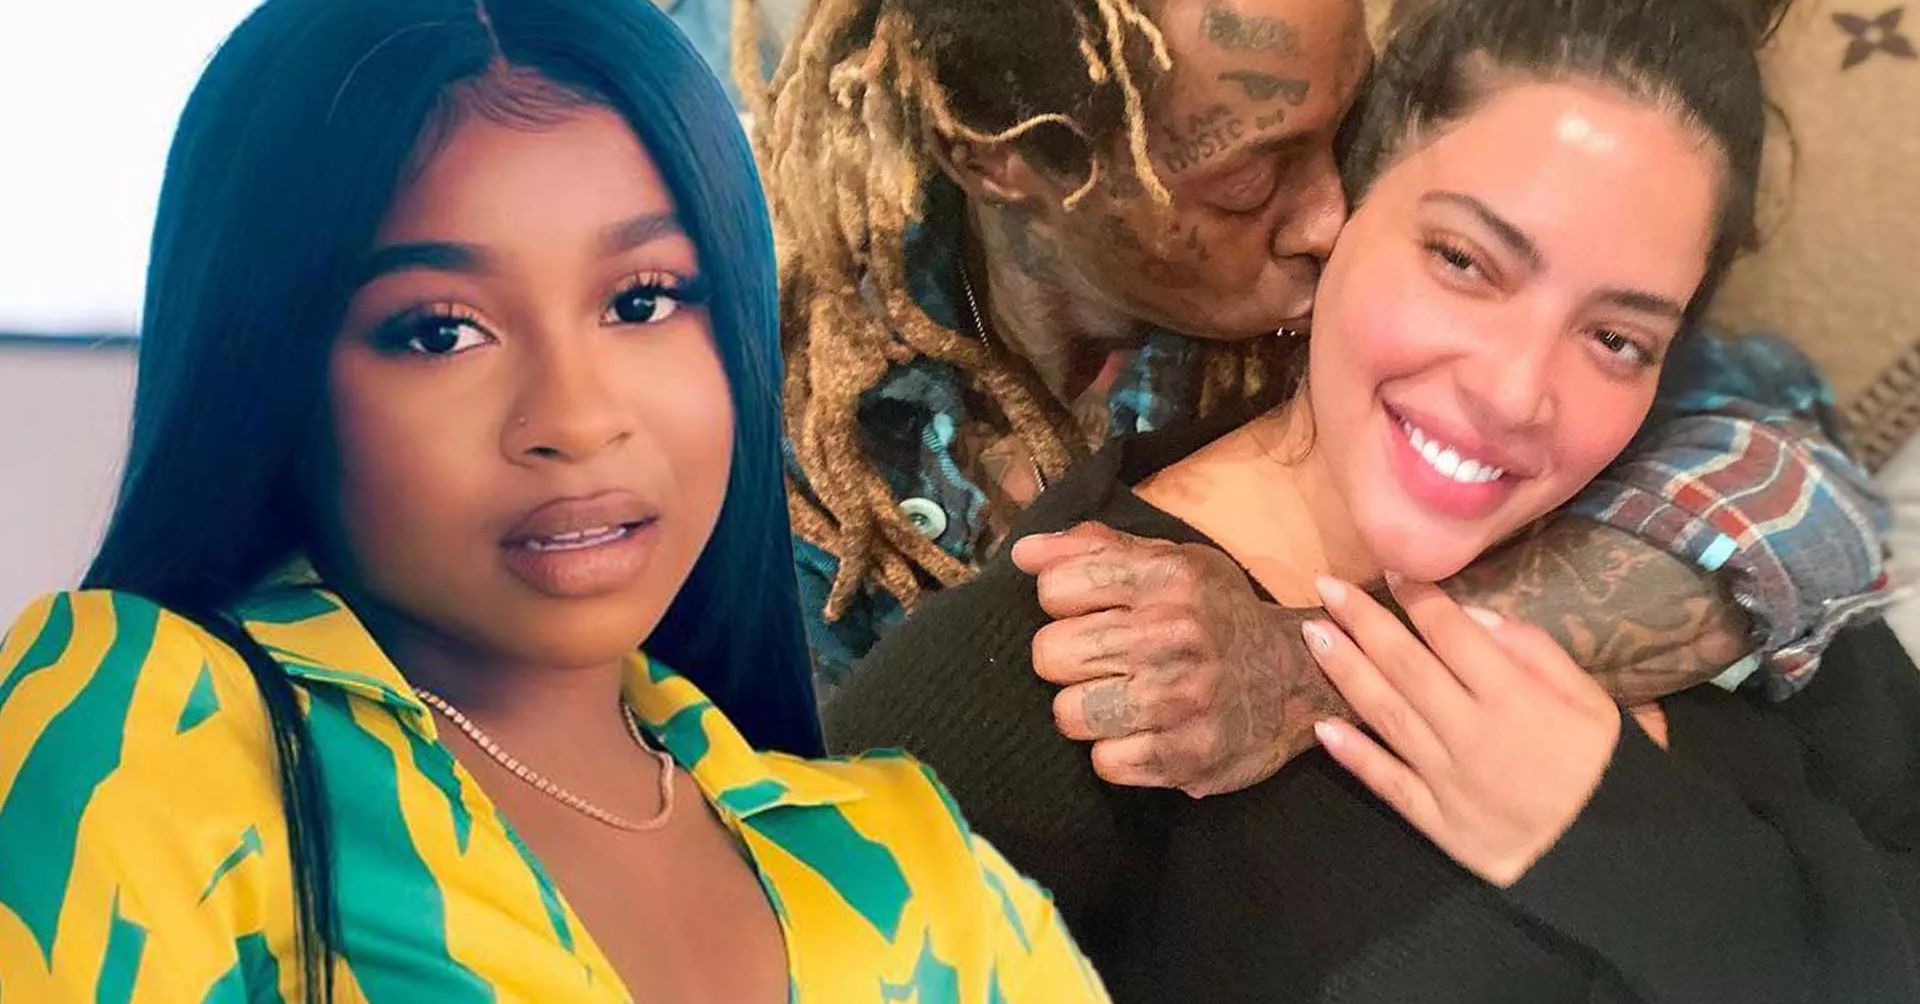 Lil Wayne S Daughter Reginae Tells Dad And New Gf Denise Bidot To Get A Room After Public Pda Pic